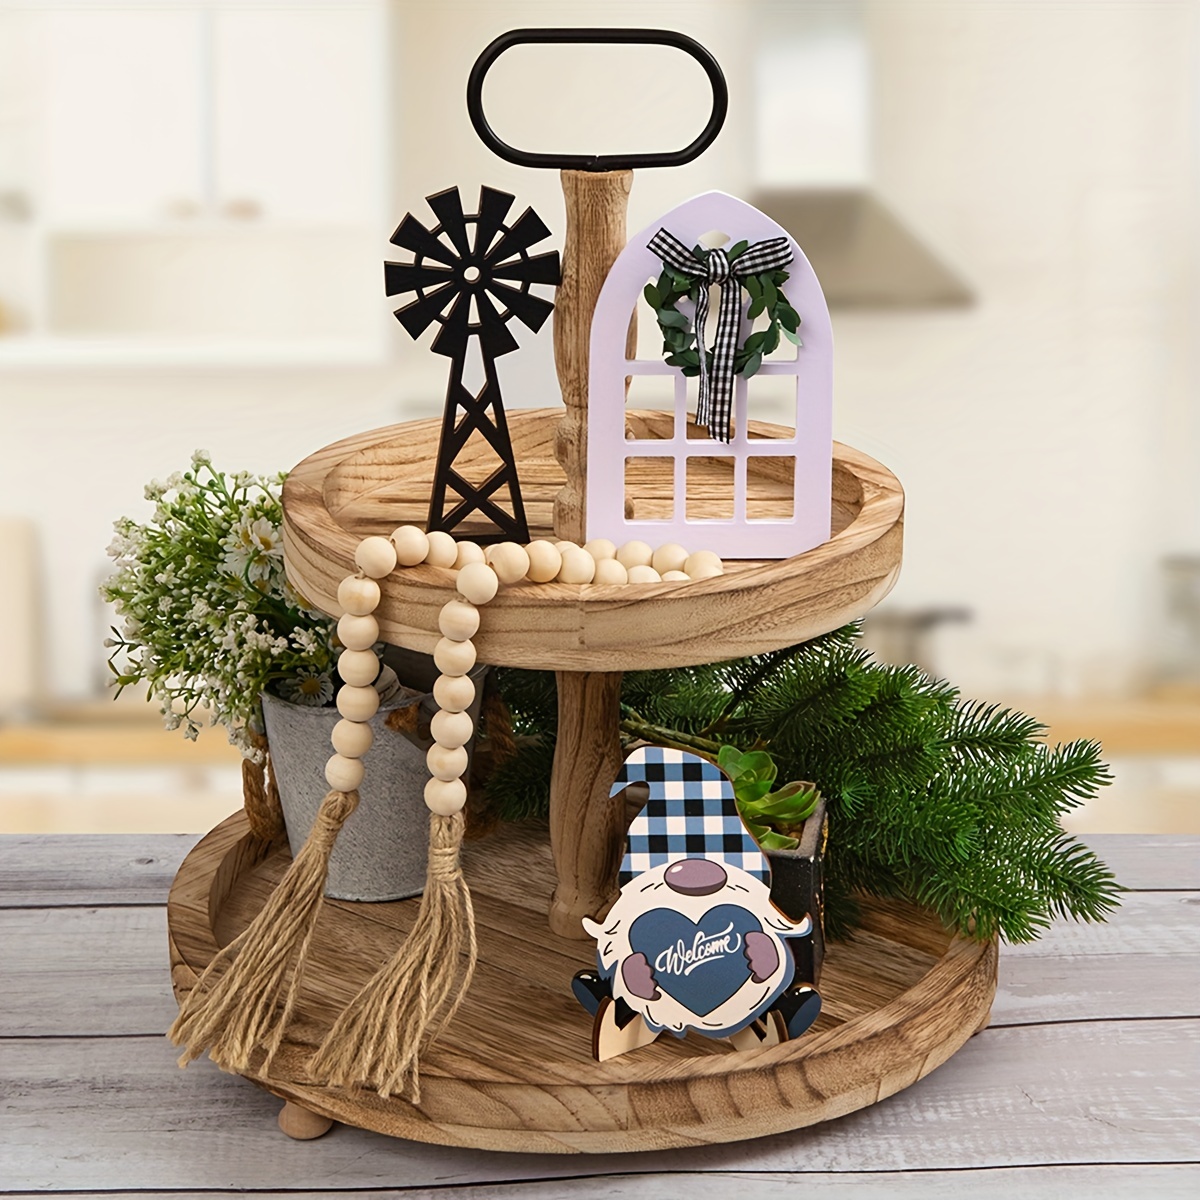 Home Decor Rustic Home Sweet Home Kitchen Decor Tiered Tray Decorative Set  Home Decor Gifts(without tray) 